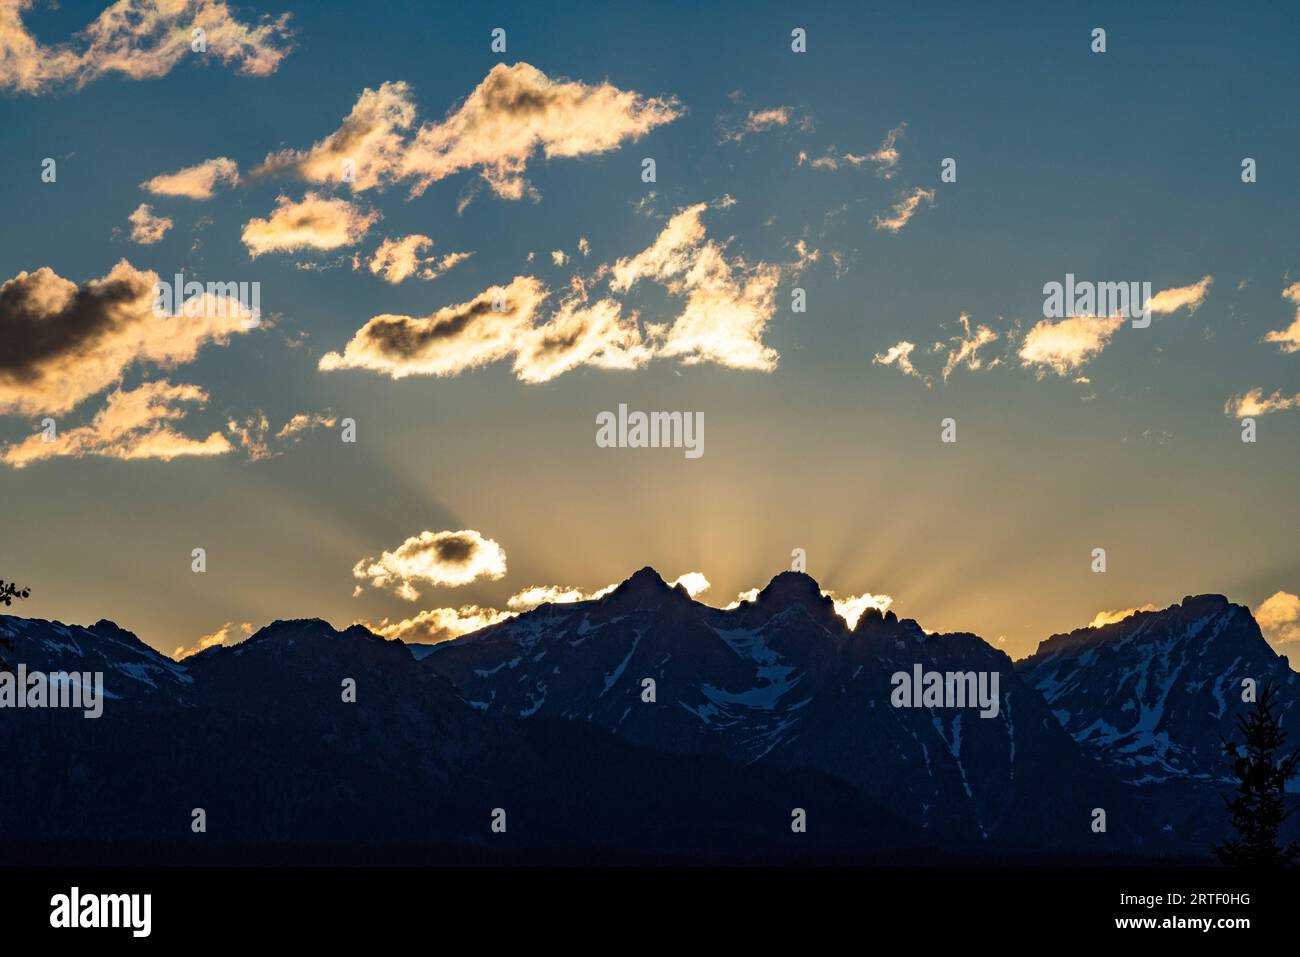 USA, Idaho, Stanley, Scenic view of Sawtooth Mountains at sunset Stock Photo